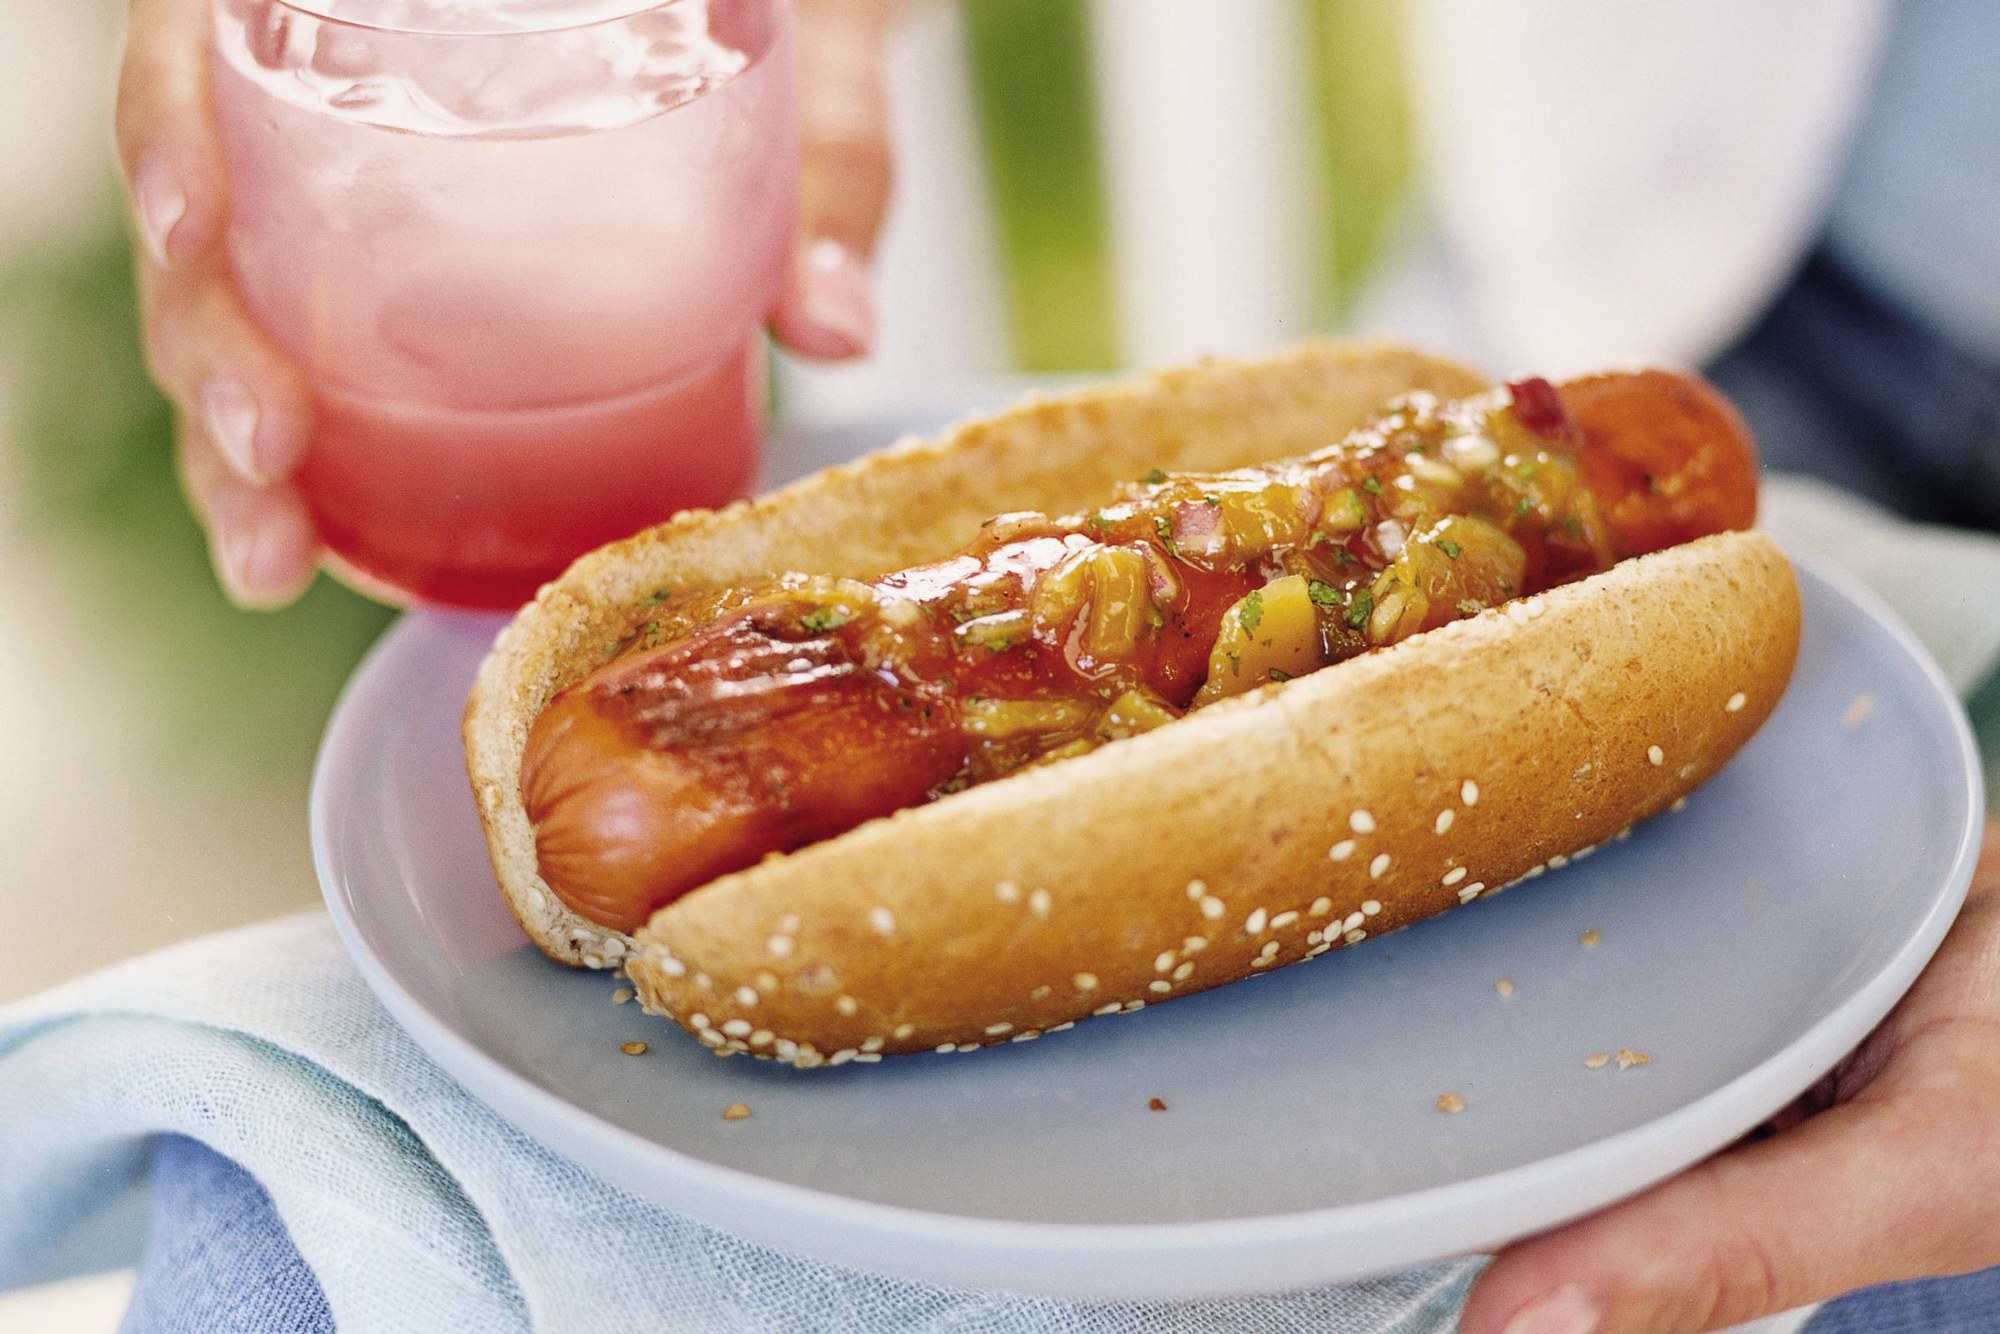 Build Saucy Hot Dog & I'll Give You Celebrity Beefcake … Quiz 118